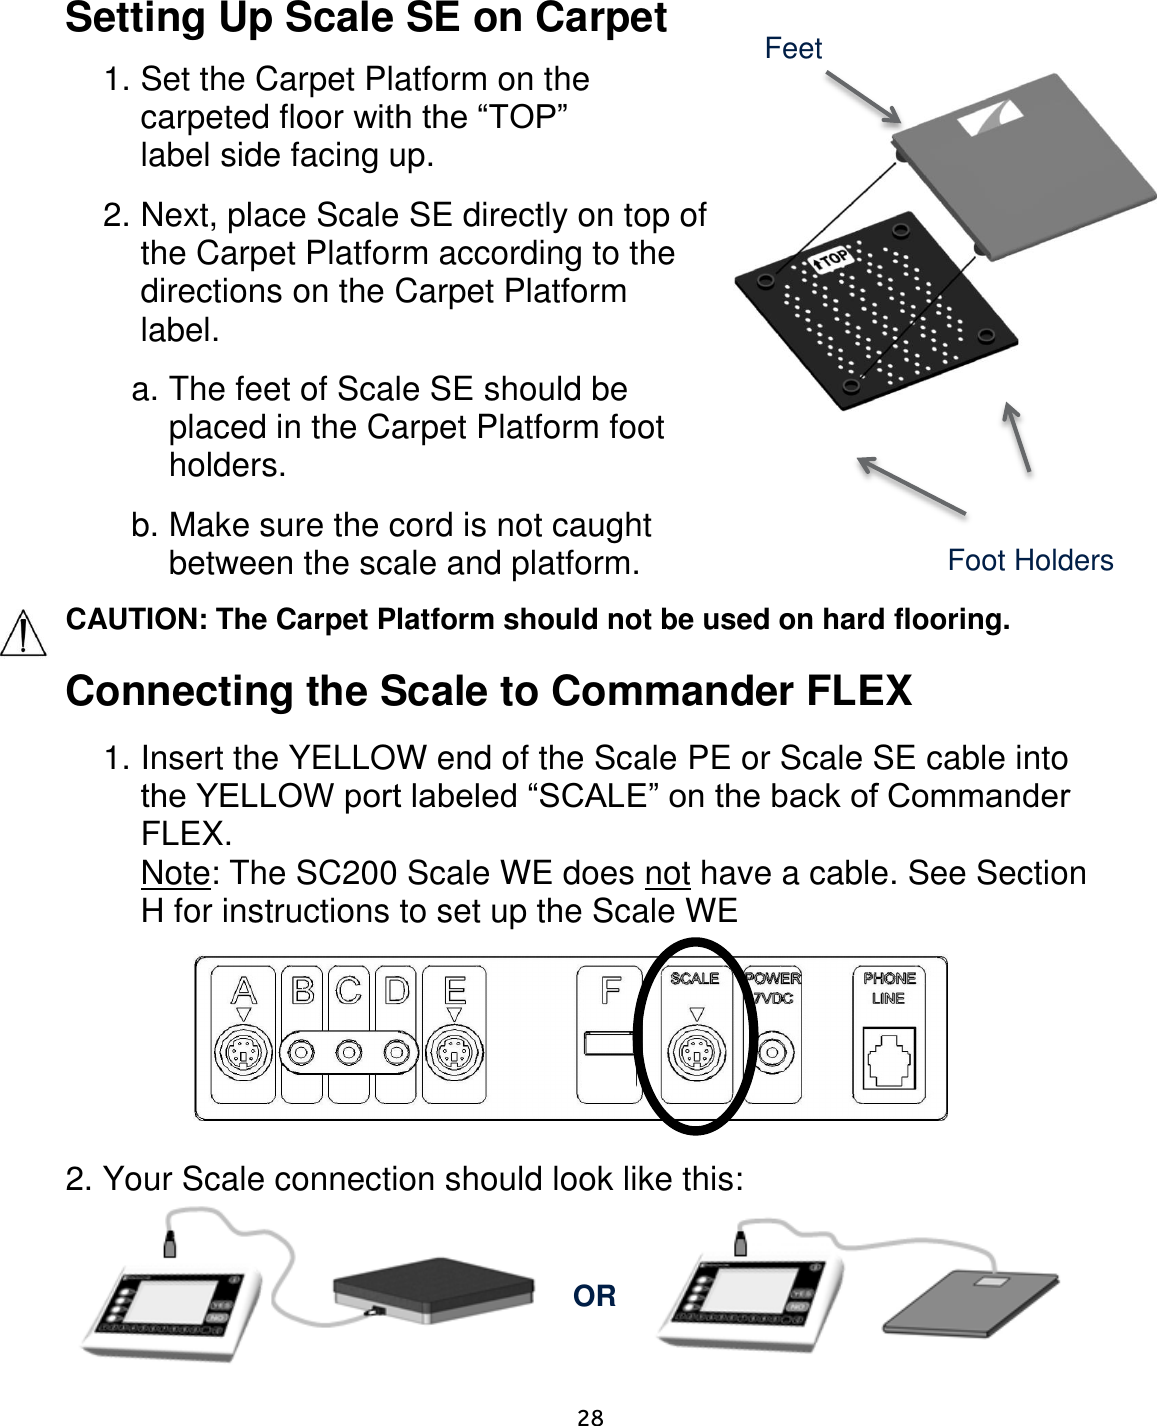     28  Setting Up Scale SE on Carpet   1. Set the Carpet Platform on the carpeted floor with the “TOP” label side facing up. 2. Next, place Scale SE directly on top of the Carpet Platform according to the directions on the Carpet Platform label. a. The feet of Scale SE should be placed in the Carpet Platform foot holders. b. Make sure the cord is not caught between the scale and platform. CAUTION: The Carpet Platform should not be used on hard flooring.  Connecting the Scale to Commander FLEX   1. Insert the YELLOW end of the Scale PE or Scale SE cable into the YELLOW port labeled “SCALE” on the back of Commander FLEX. Note: The SC200 Scale WE does not have a cable. See Section H for instructions to set up the Scale WE          2. Your Scale connection should look like this:      Foot Holders Feet OR 